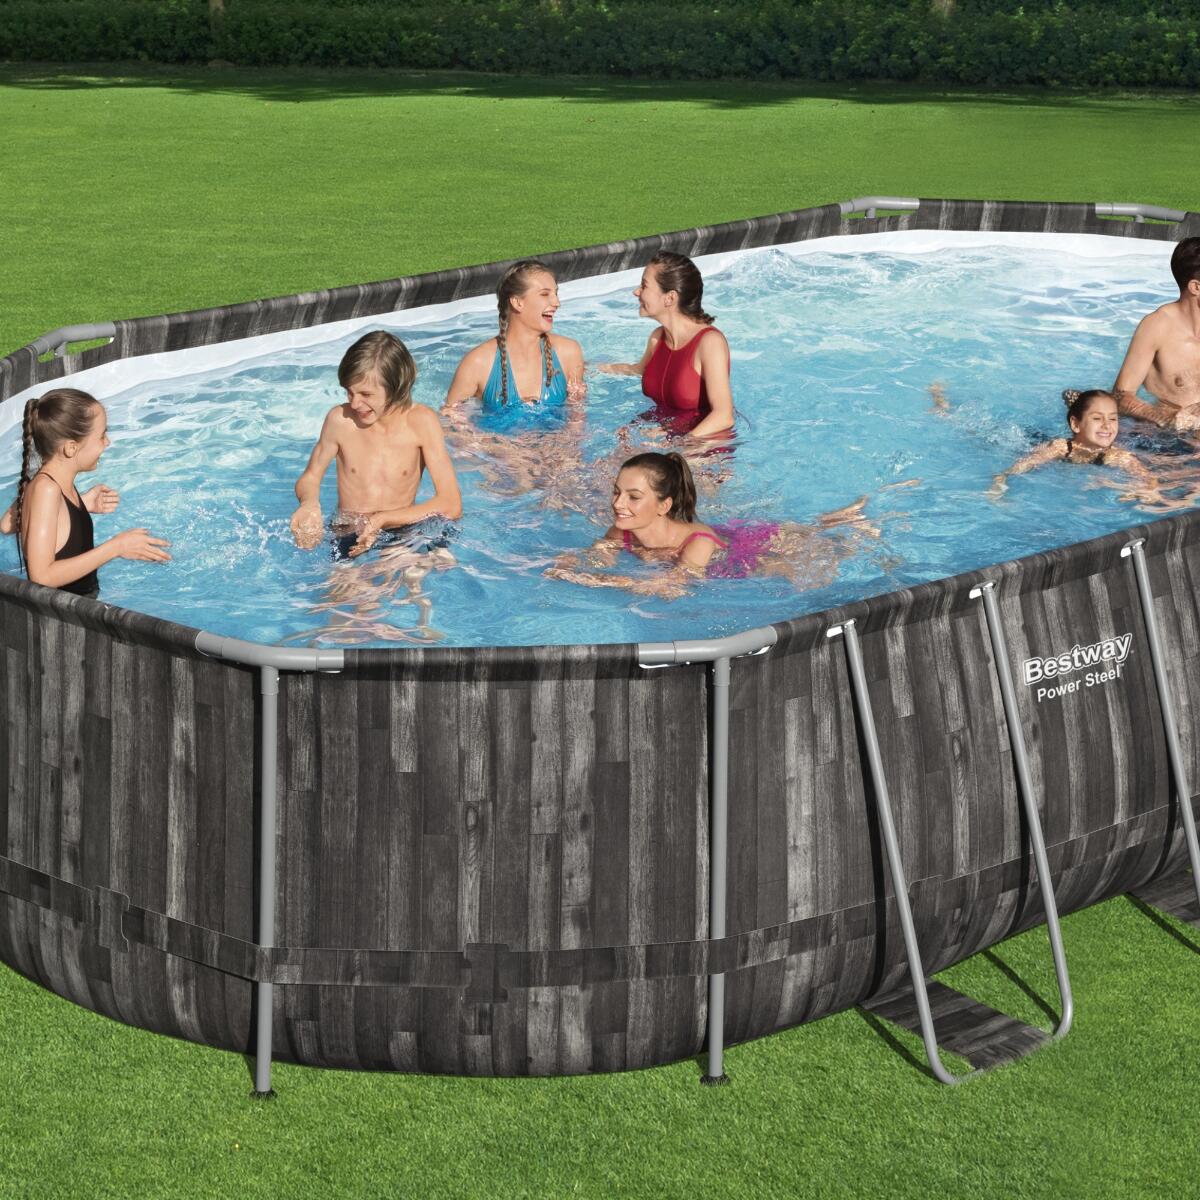 Bestway Power Steel Oval 24ft x 12ft x 52" Above Ground Swimming Pool 2/7